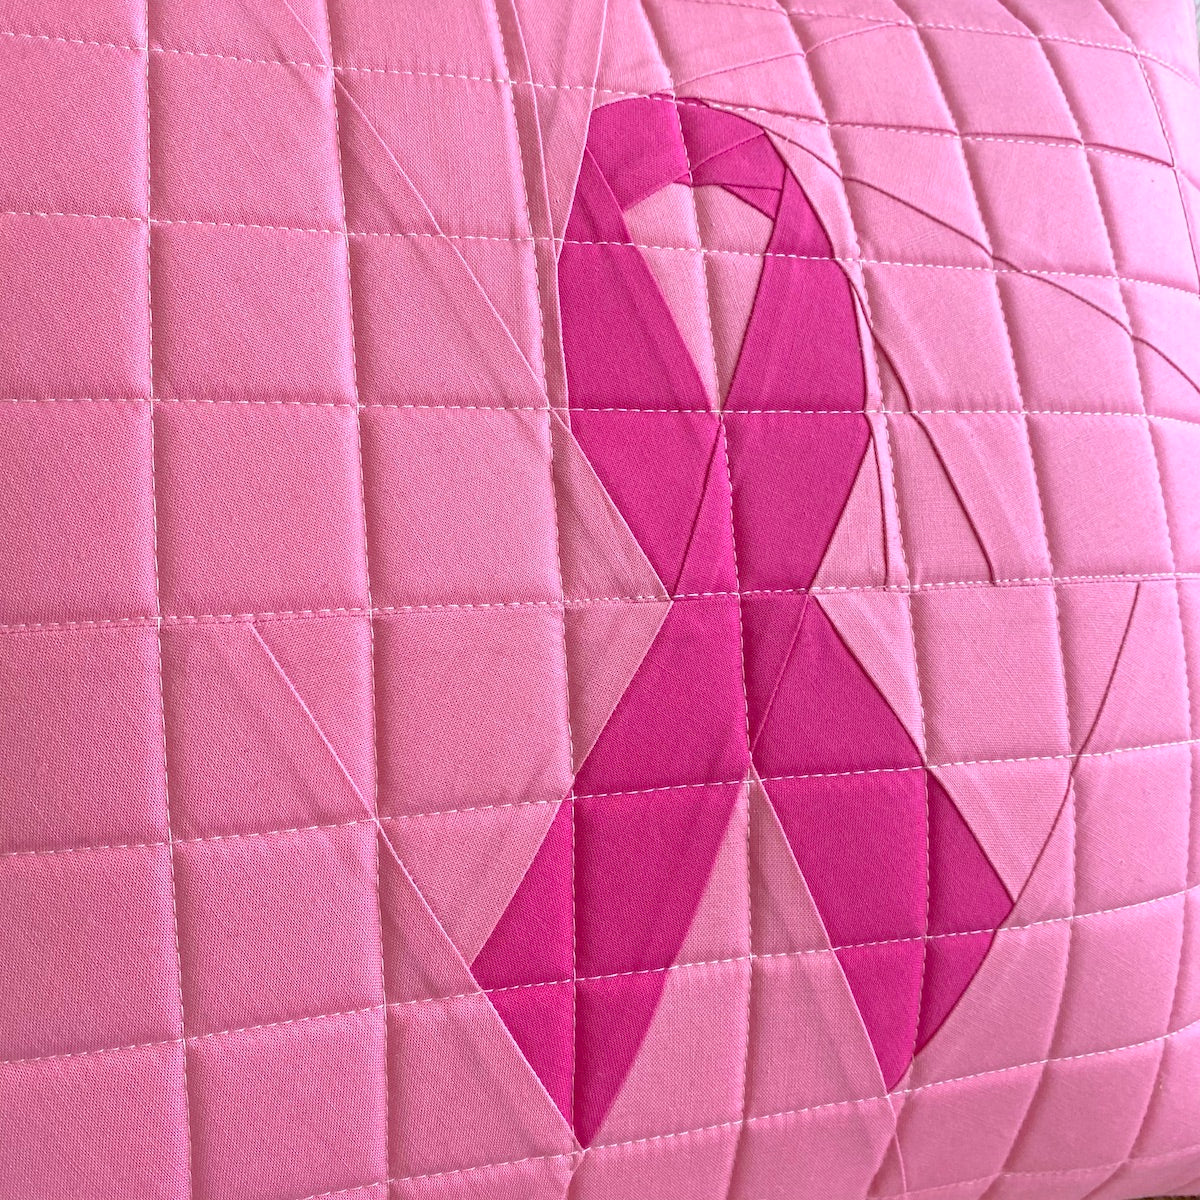 SewPINK Breast Cancer Awareness Ribbon Pillow by Sewfinity